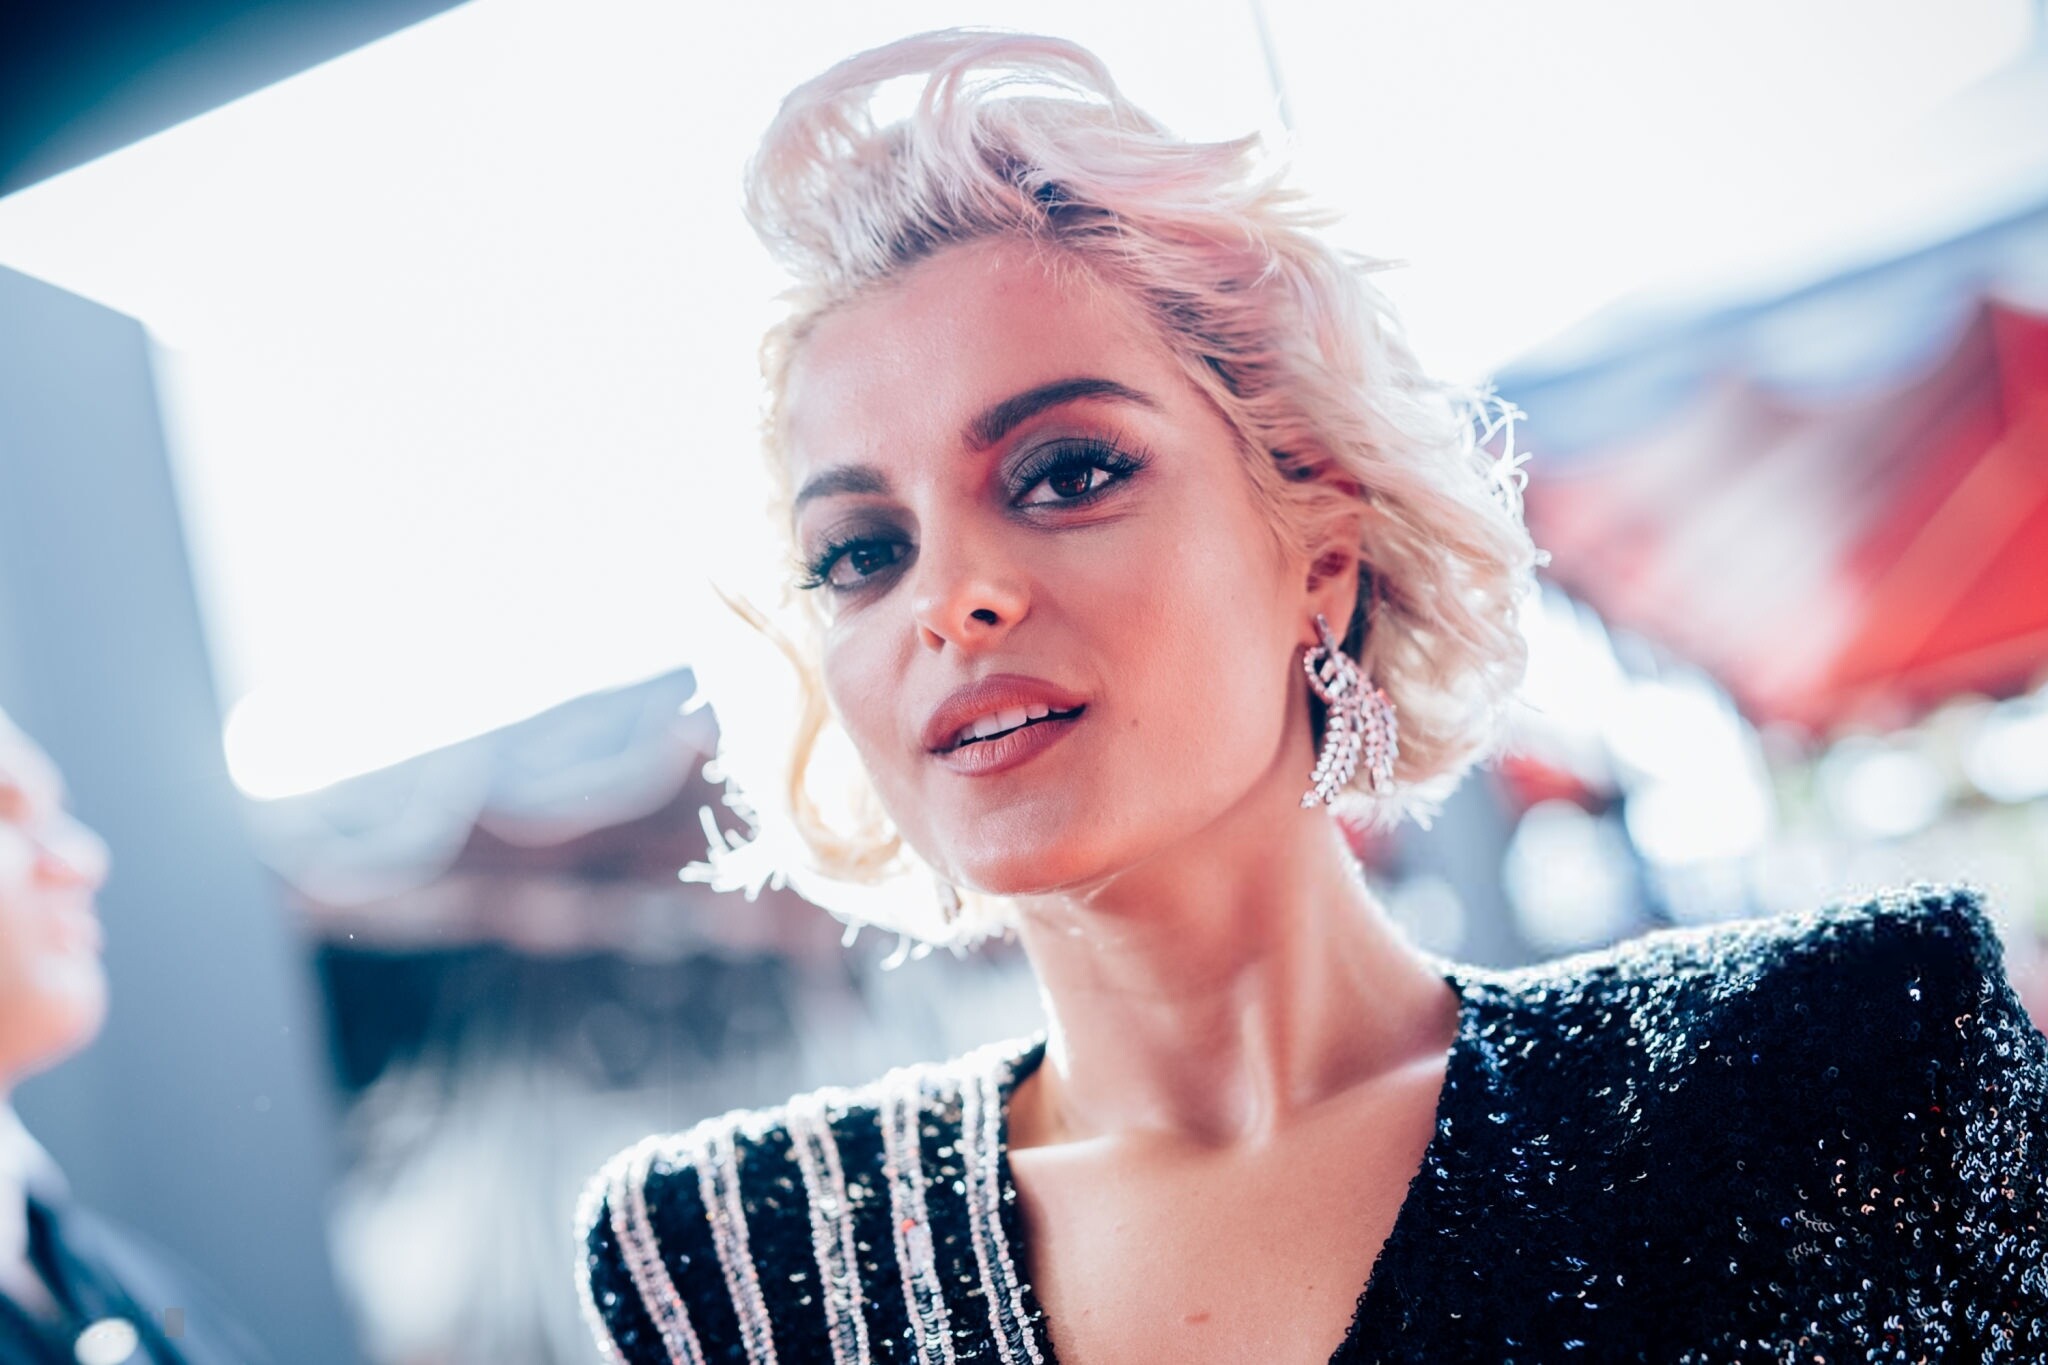 Bebe Rexha: Released two singles, "I'm Gonna Show You Crazy" and "Gone", in December 2014. 2050x1370 HD Wallpaper.